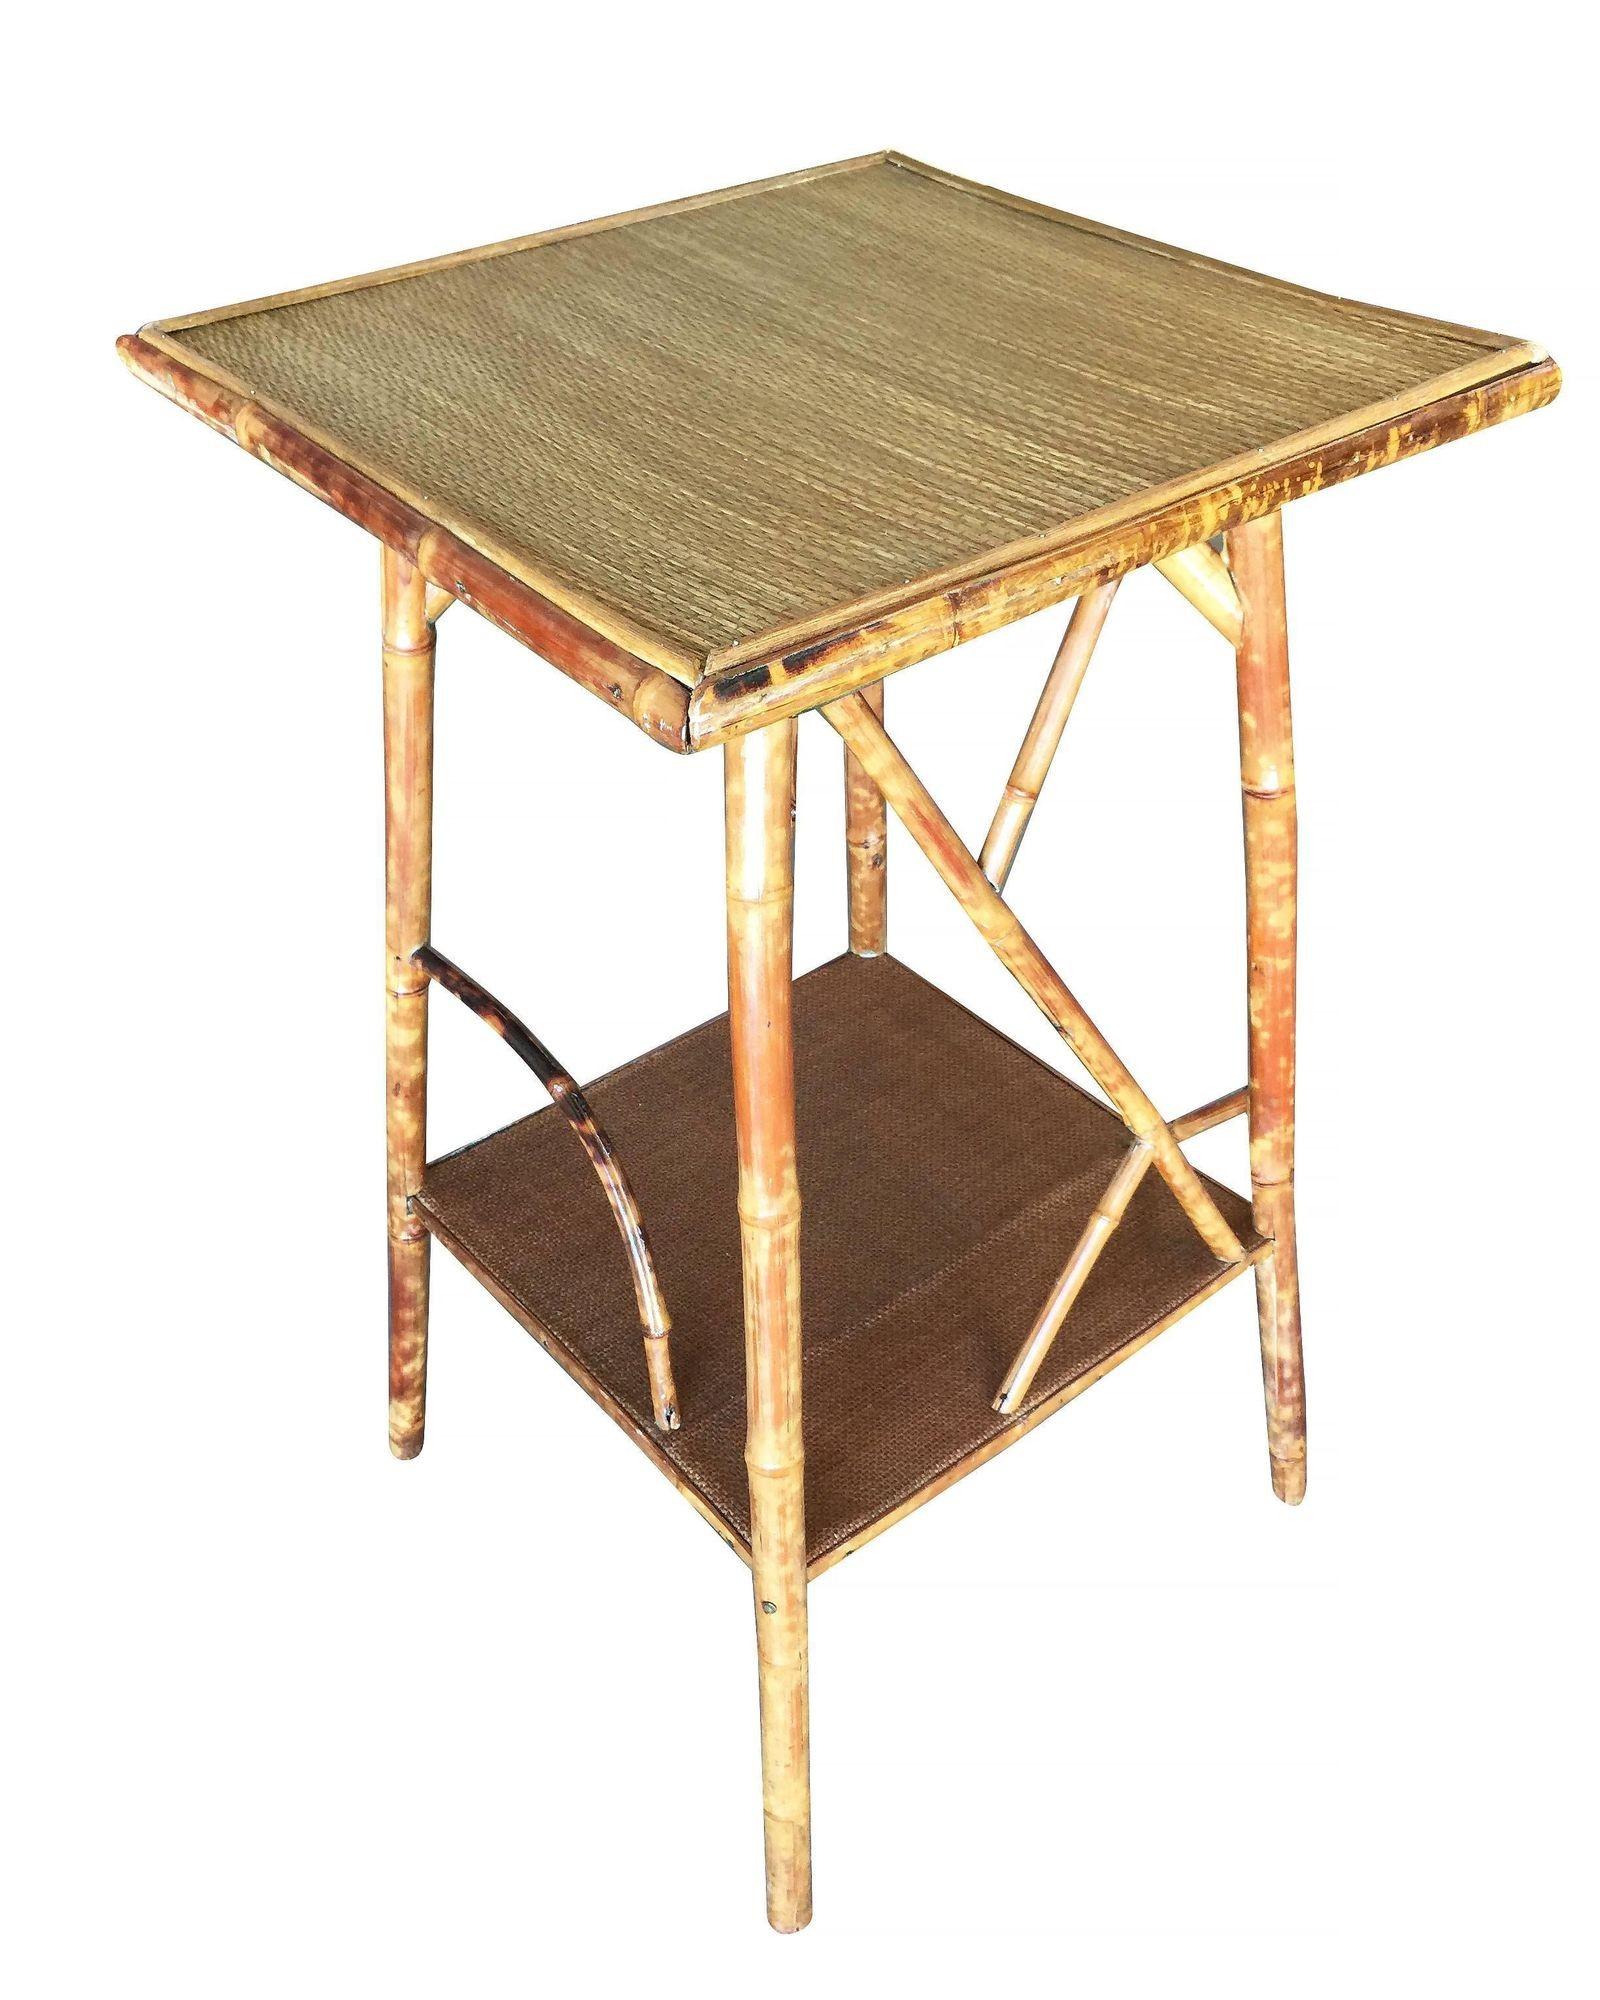 American Restored Tiger Bamboo Tortoise Pedestal Side Table W/ Organic Formed Accents For Sale